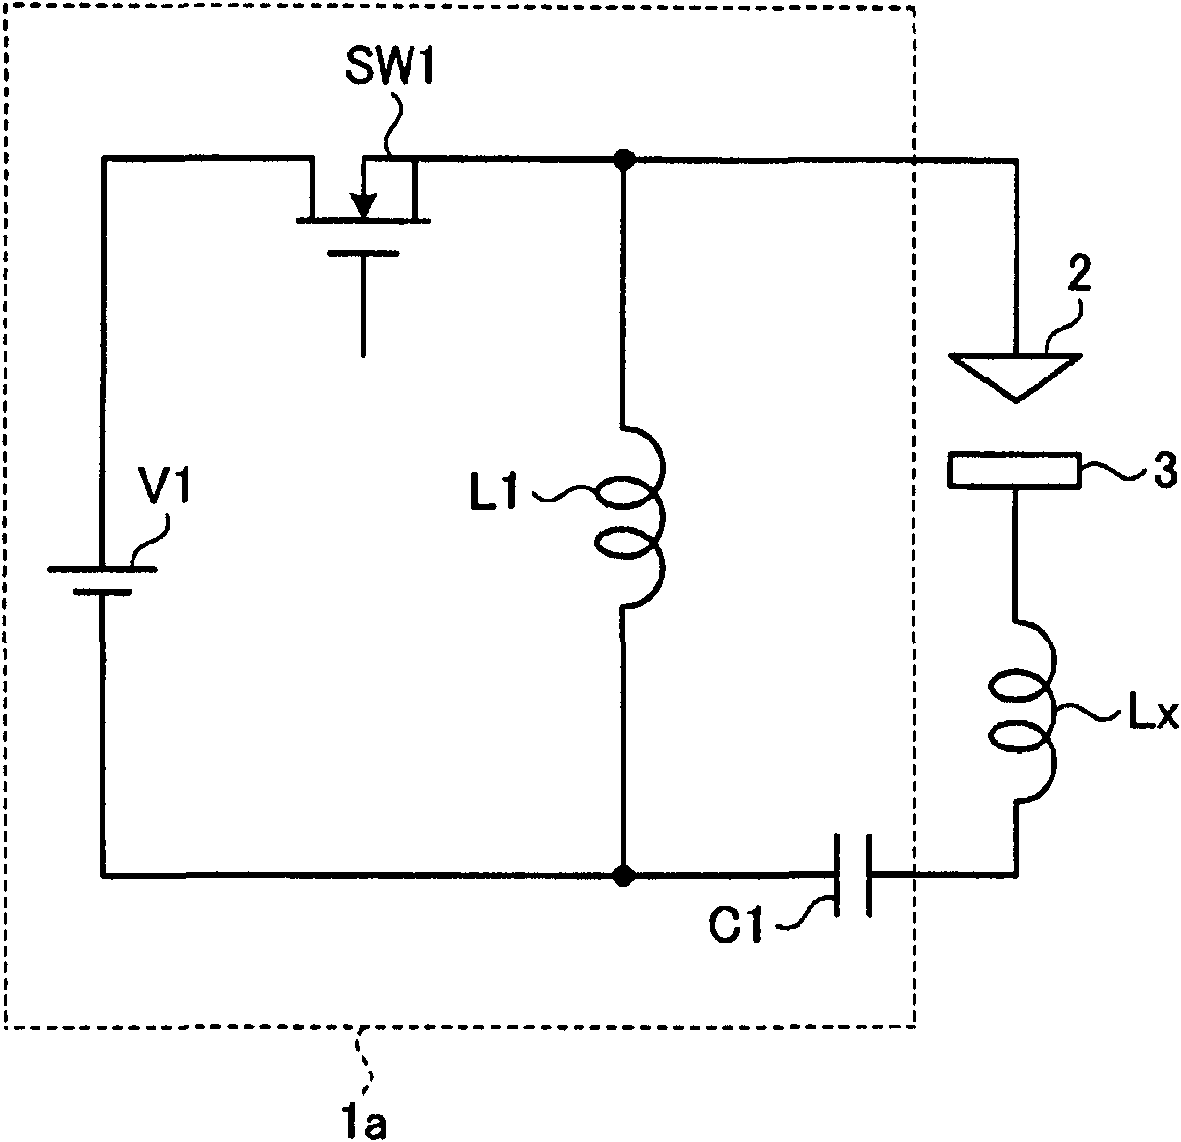 Power supply device for electric discharge machine